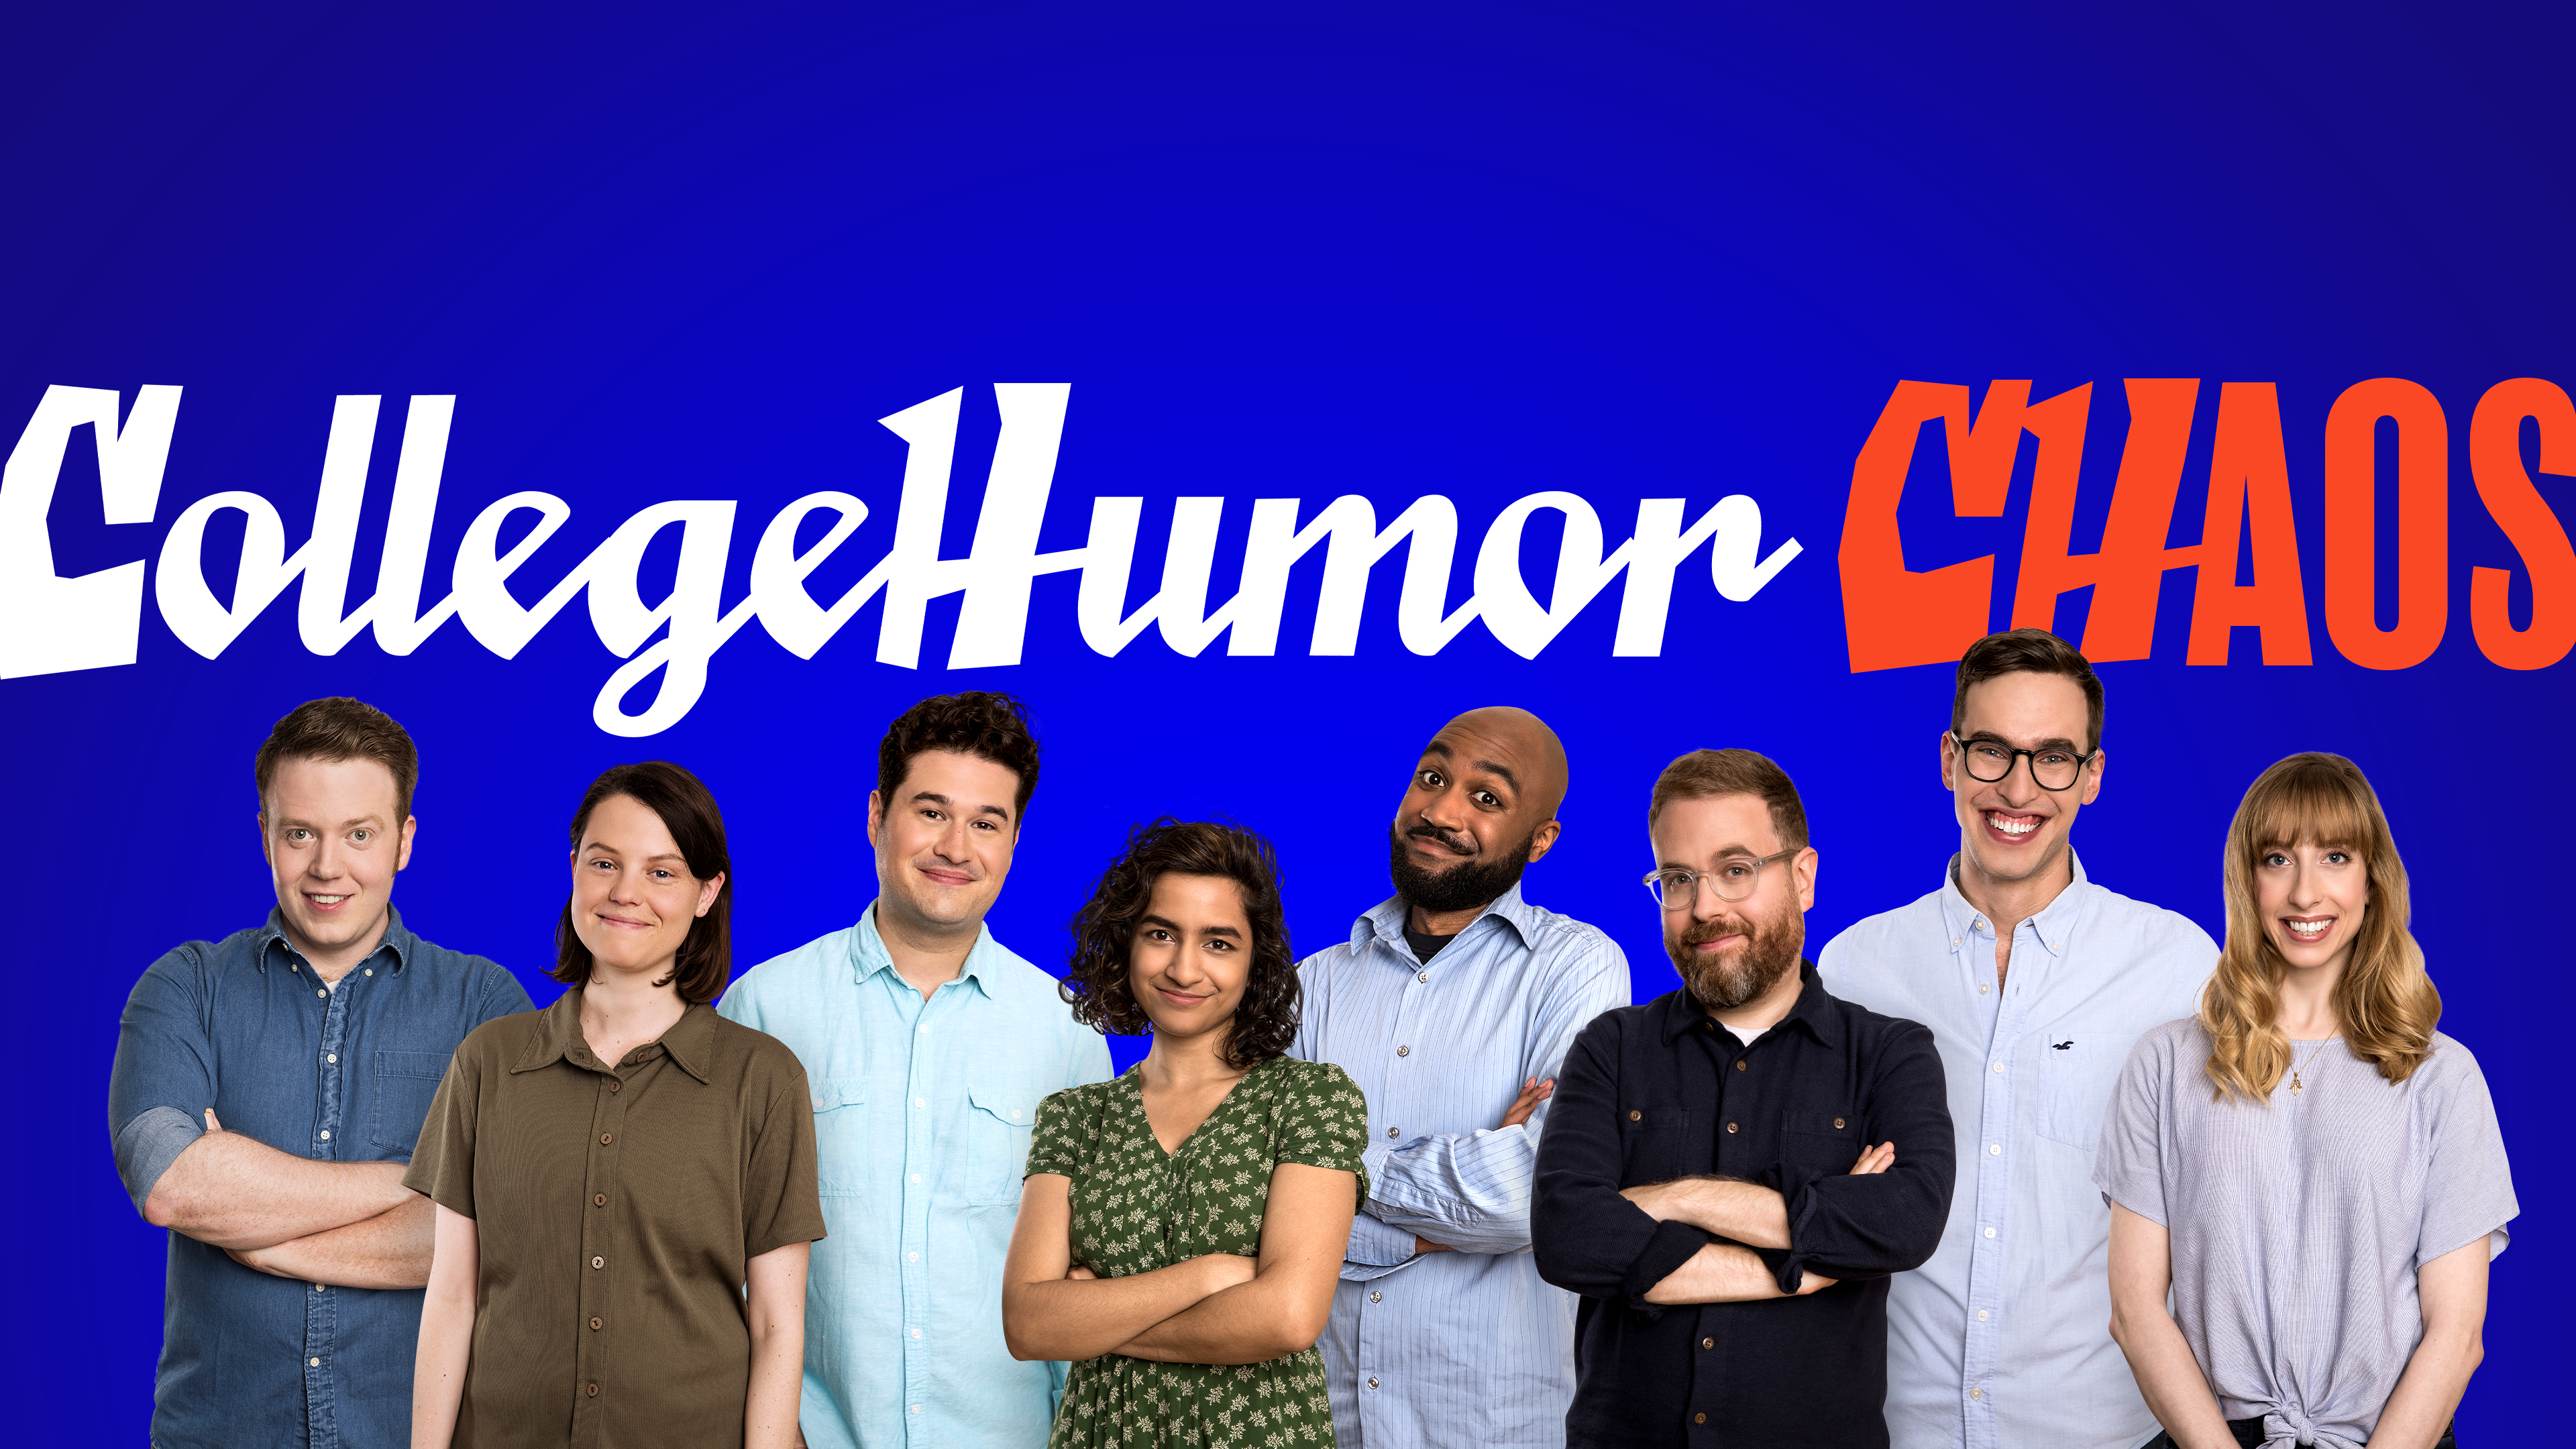 An Update on Dropout Speaking to CollegeHumor CEO Sam Reich  34th Street  Magazine